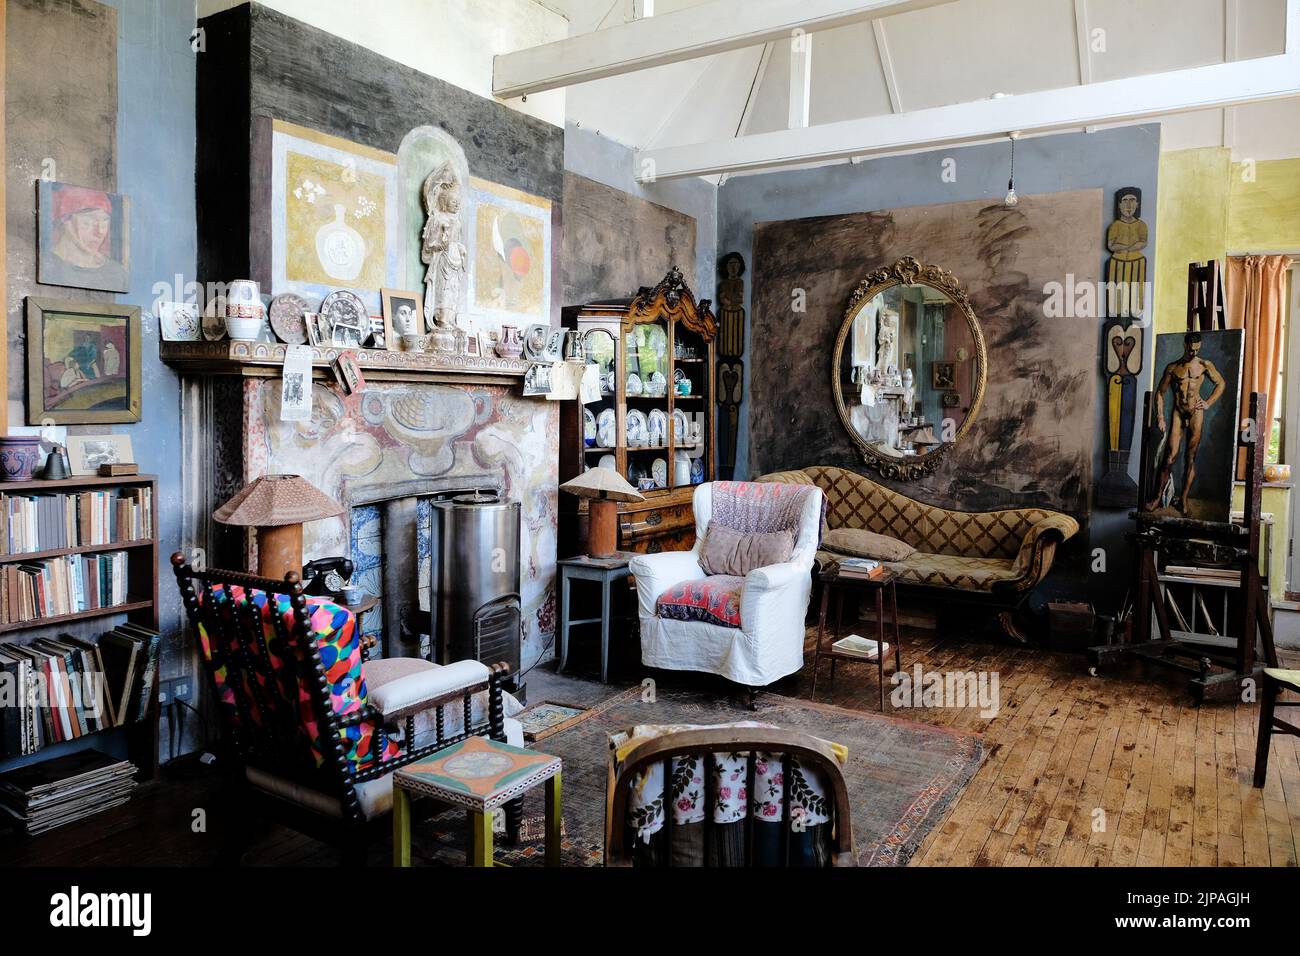 The studio at Charleston Farmhouse, near Lewes, East Sussex, England, home of the Bloomsbury Set. It was the country home of Vanessa Bell and Duncan Grant and is an example of their decorative style within a domestic context, representing the fruition of more than sixty years of artistic creativity. Stock Photo